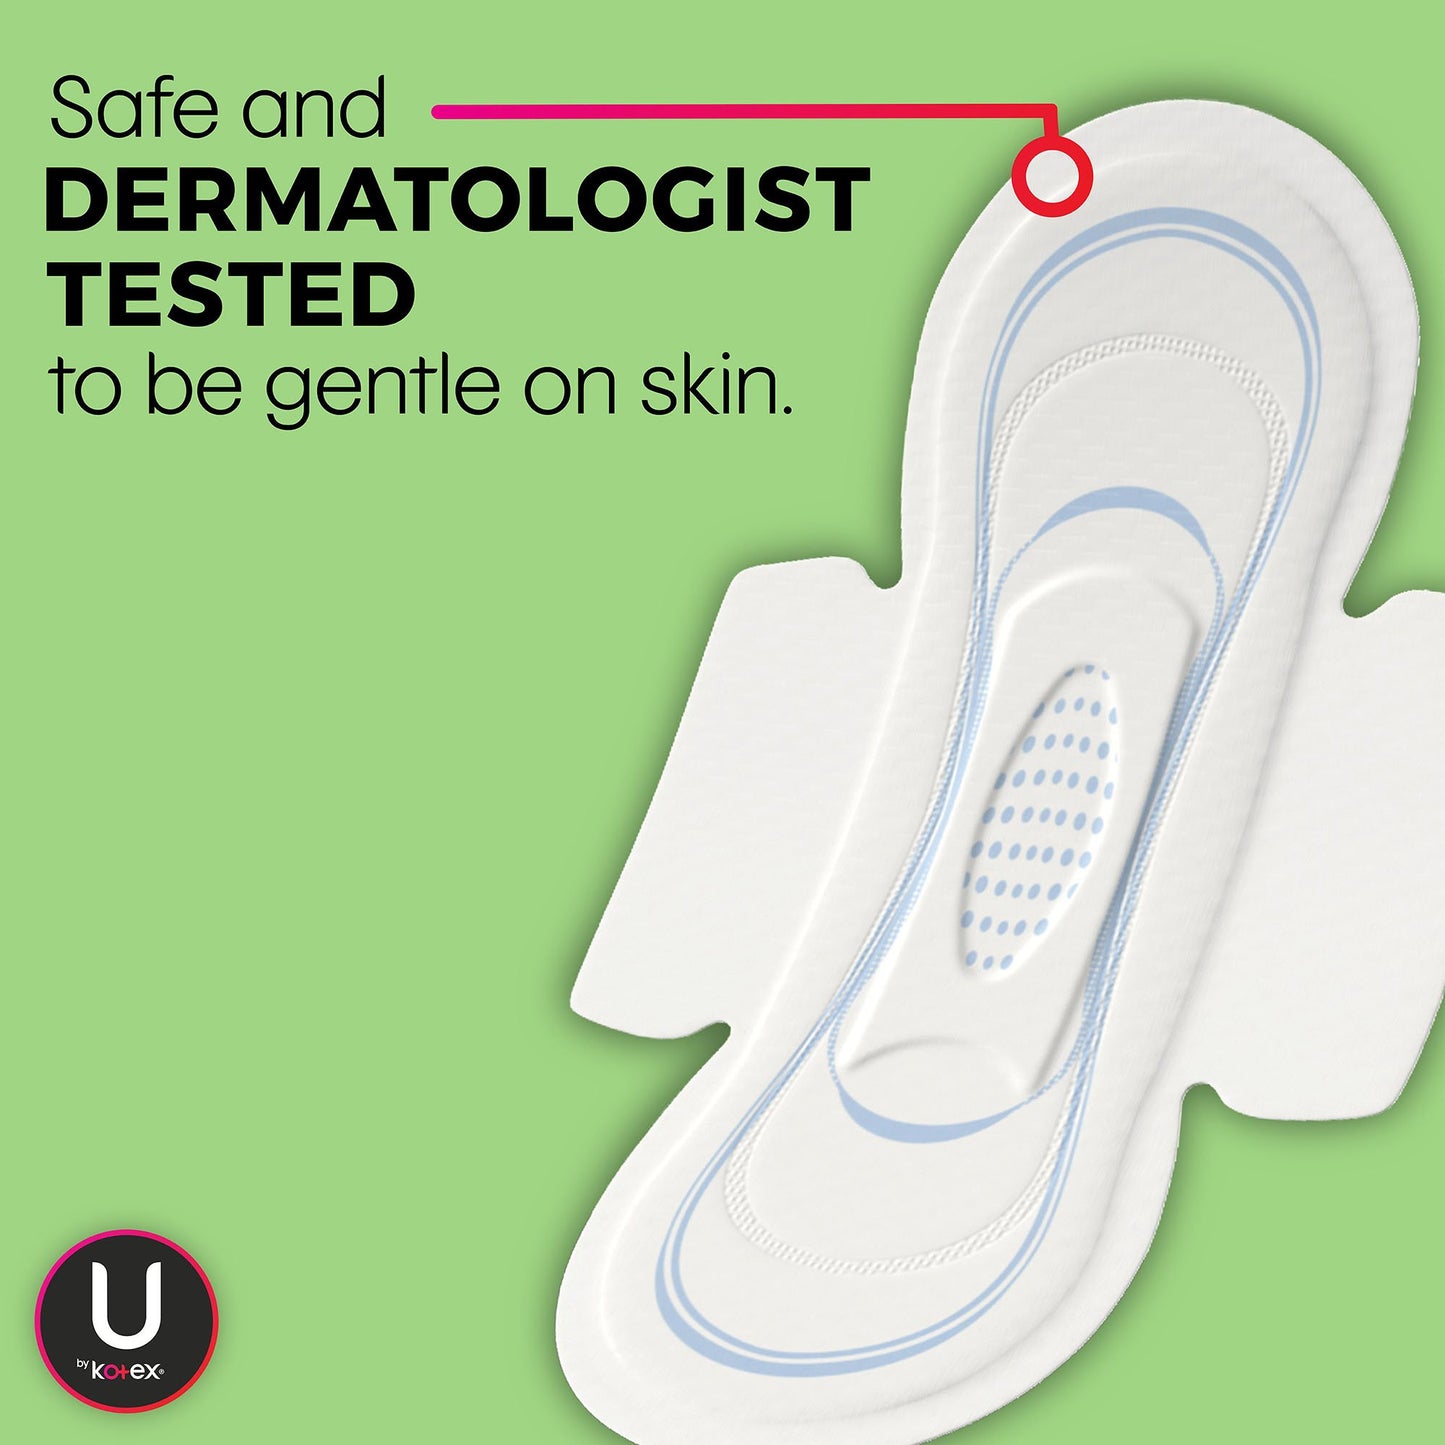 U by Kotex Security Ultra Thin Pads with Wings, Regular Absorbency, 36 ct